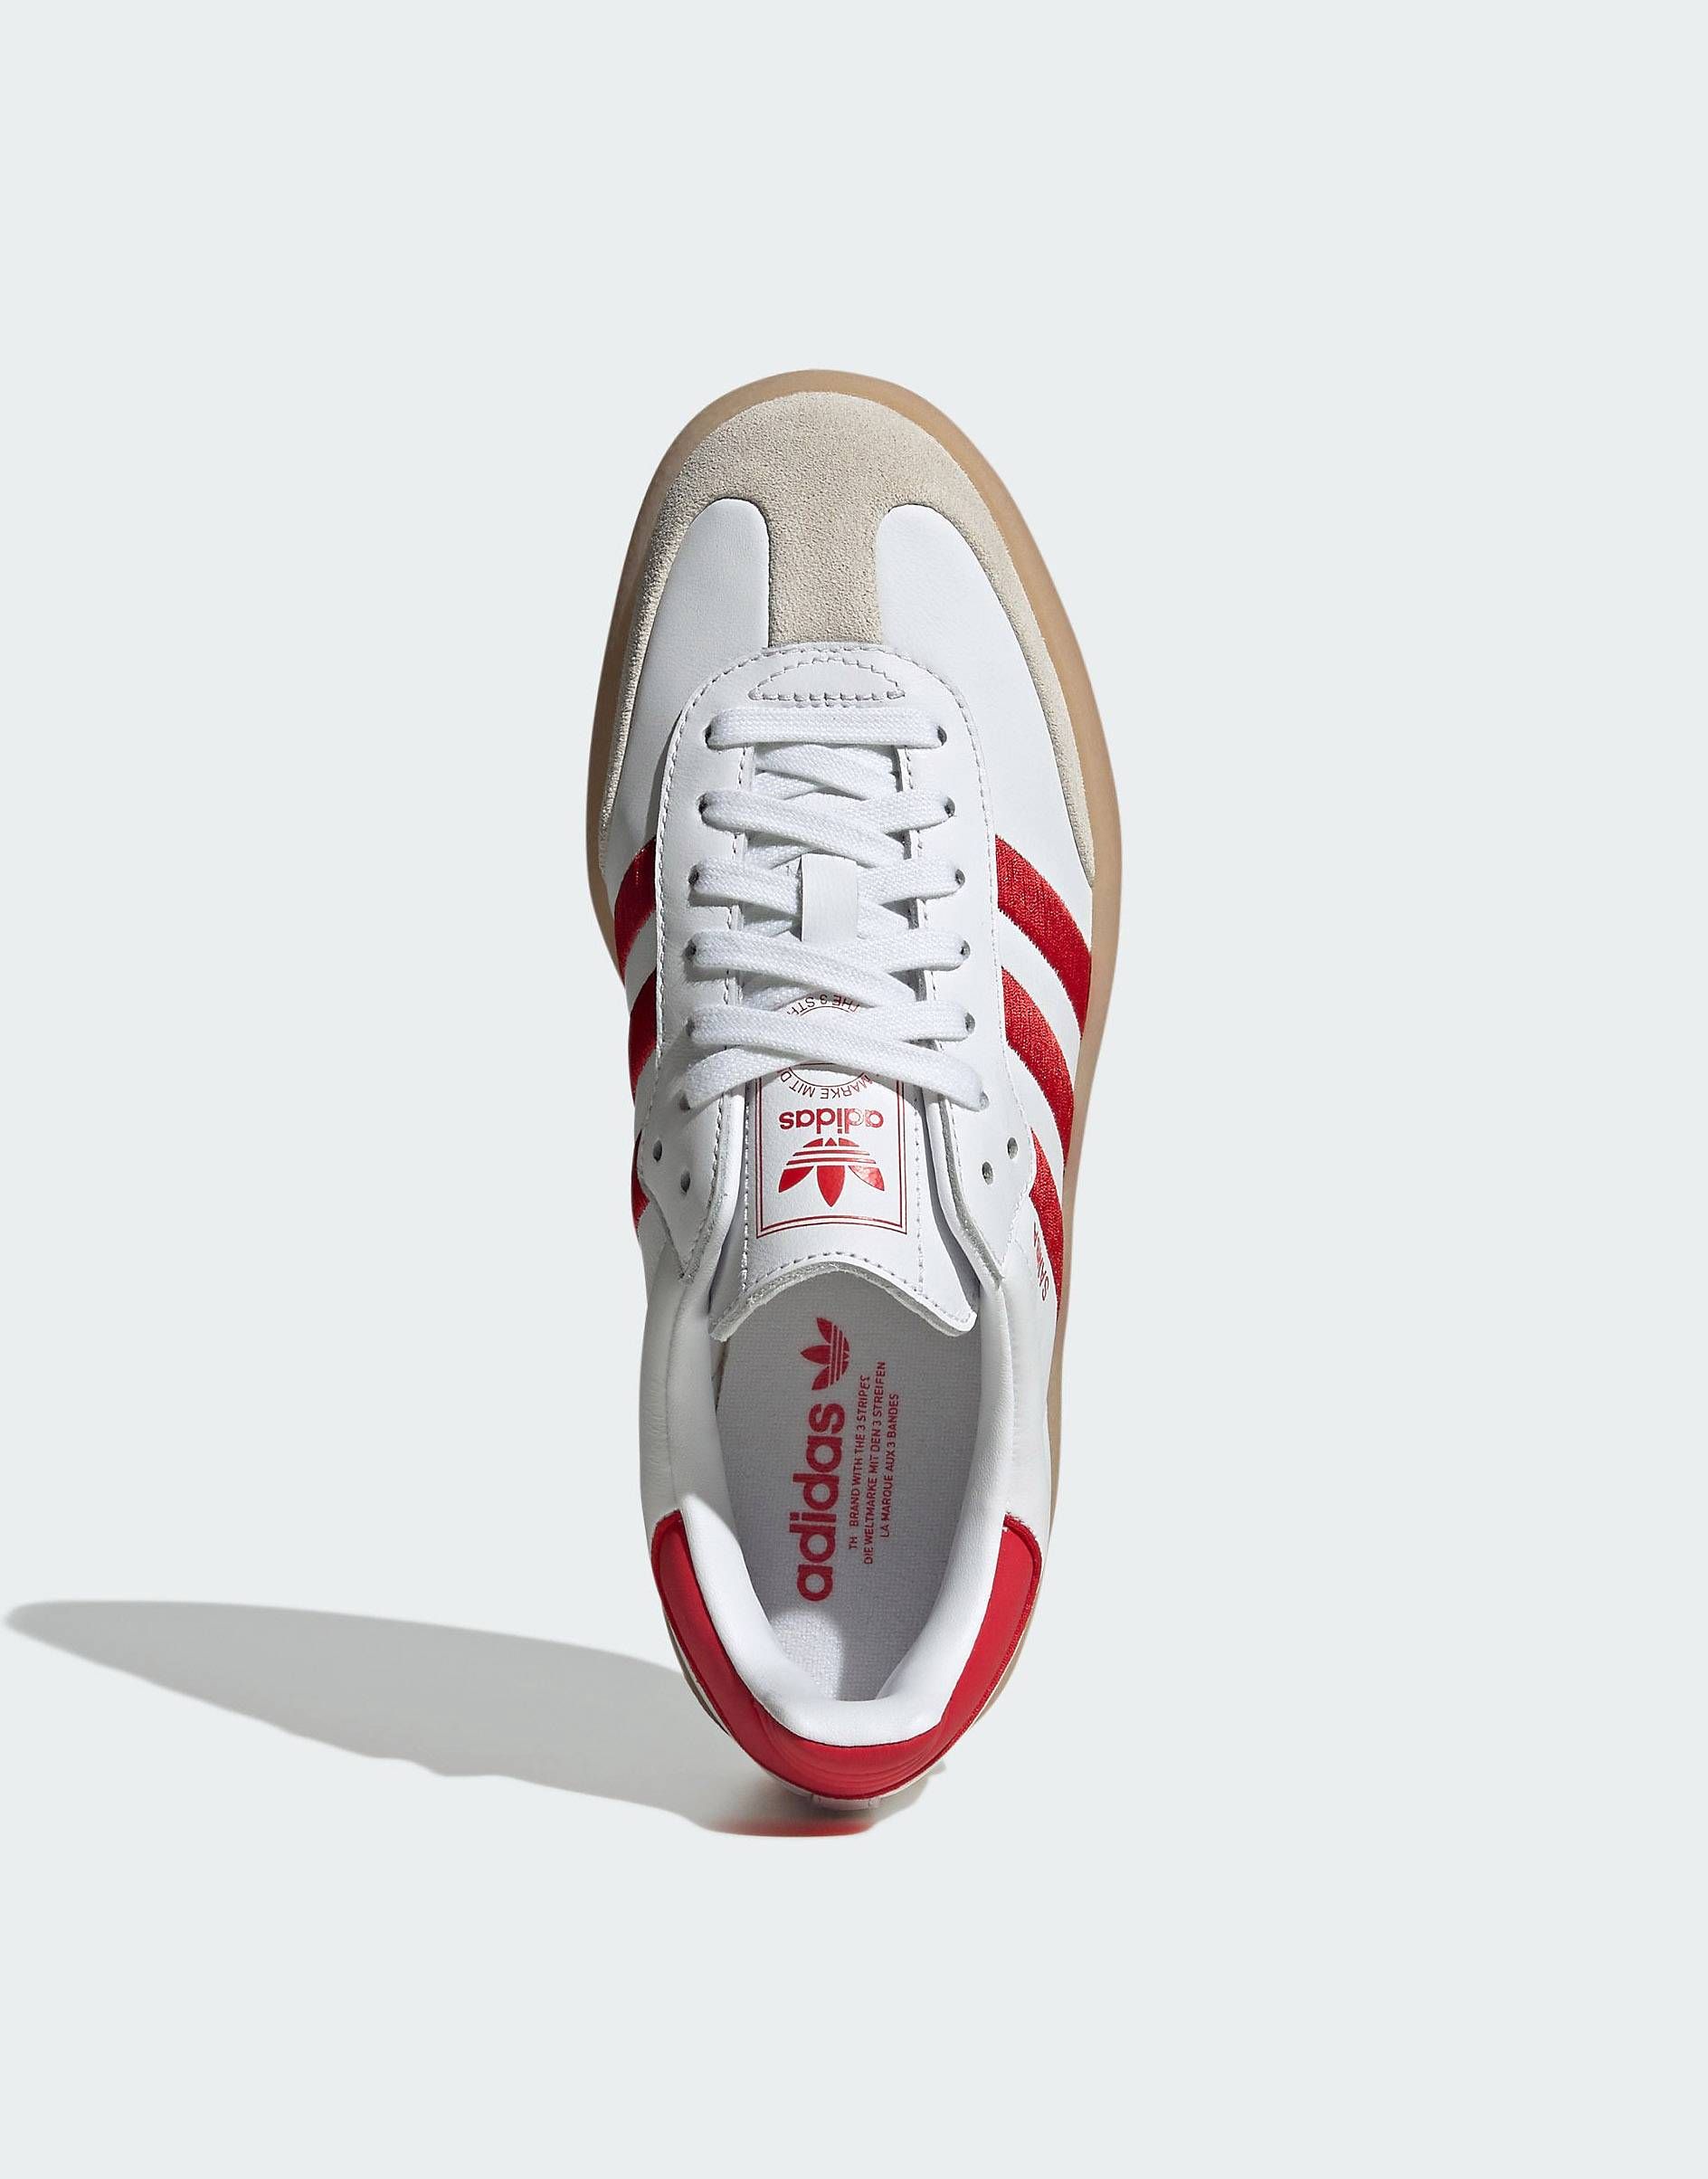 adidas Originals Sambae sneakers with gum sole in white and red | ASOS | ASOS (Global)